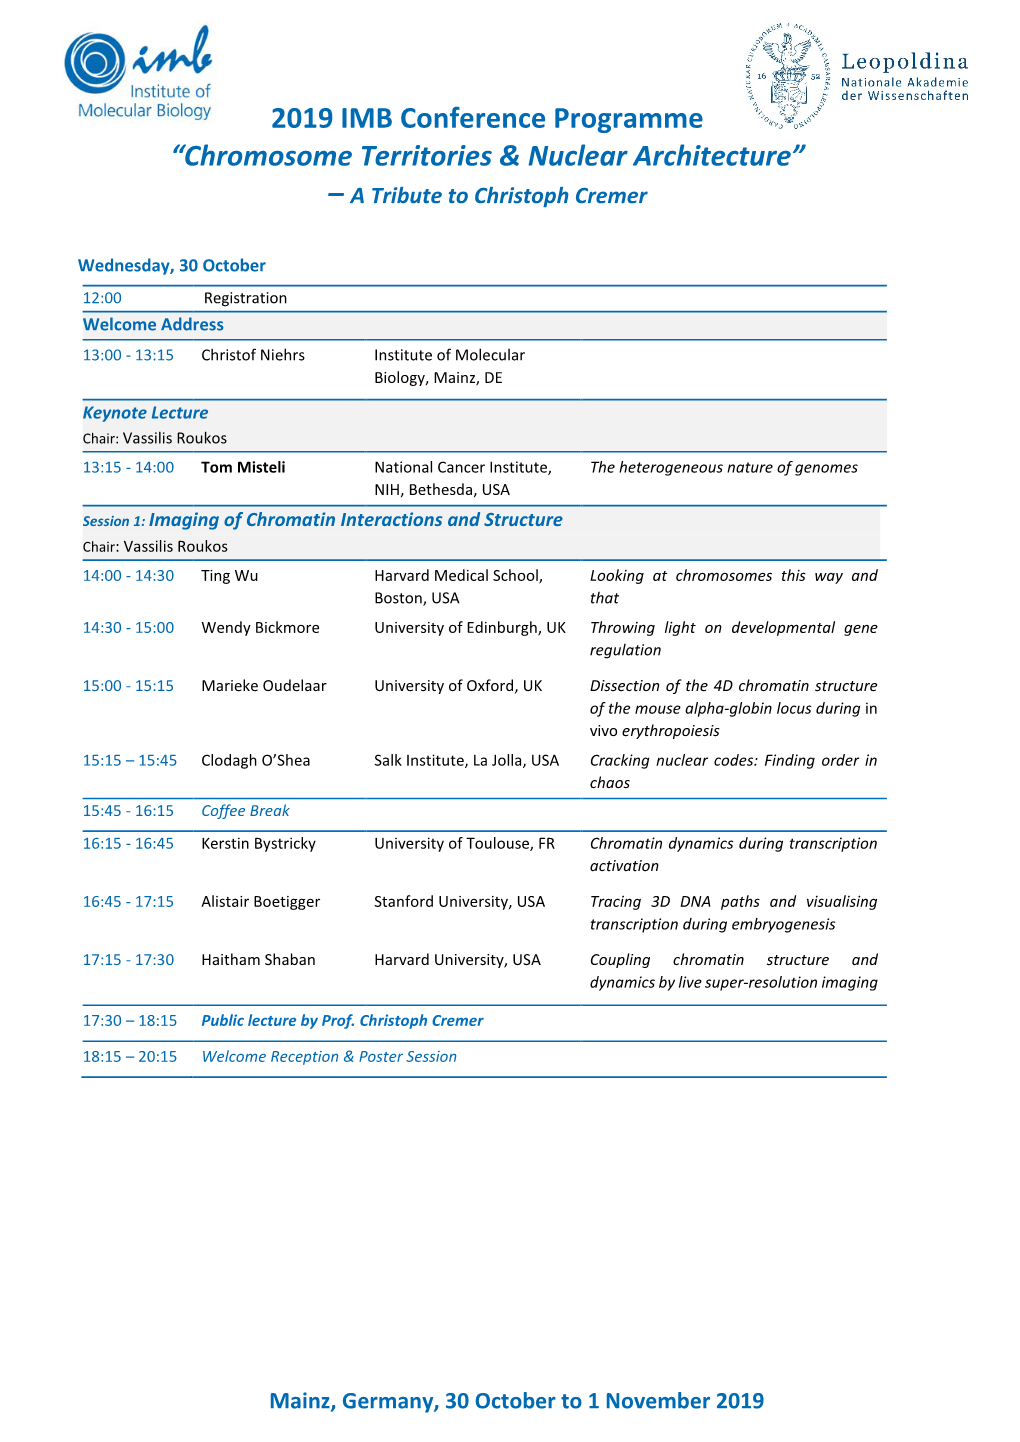 2019 IMB Conference Programme “Chromosome Territories & Nuclear Architecture”